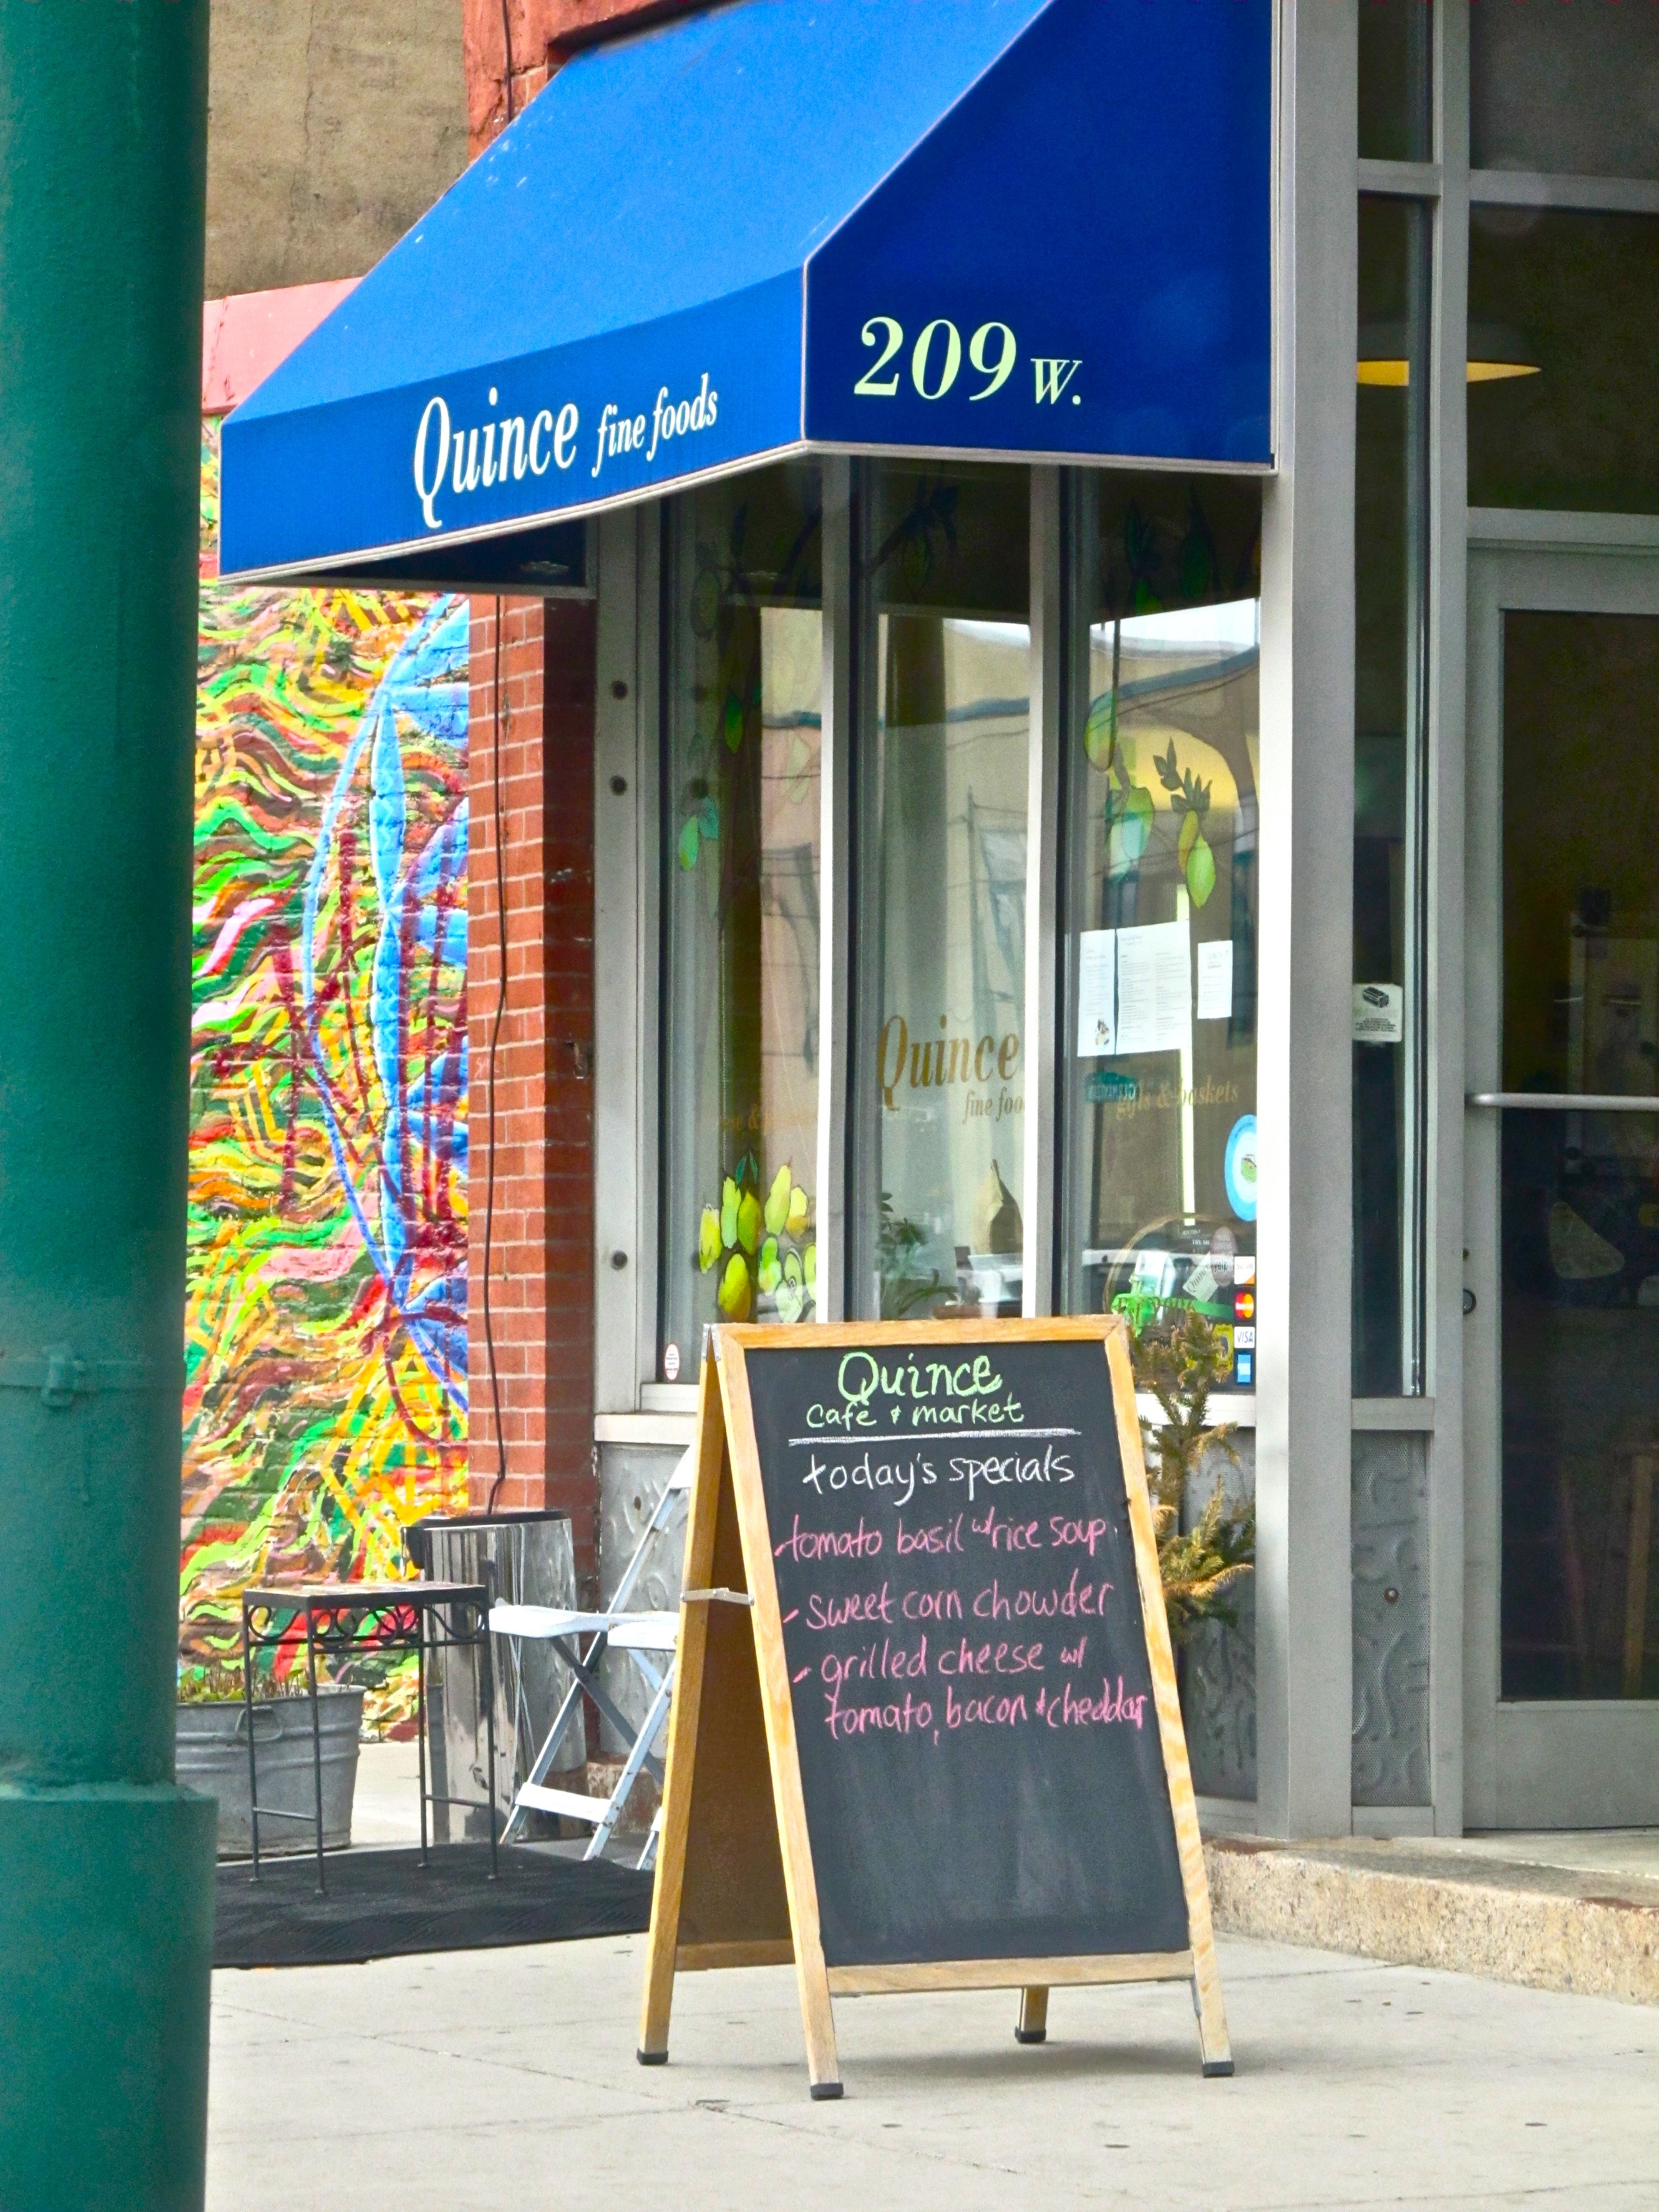 Fine Foods, a newer shop along Girard Avenue, has also brought more business and shoppers to the area.